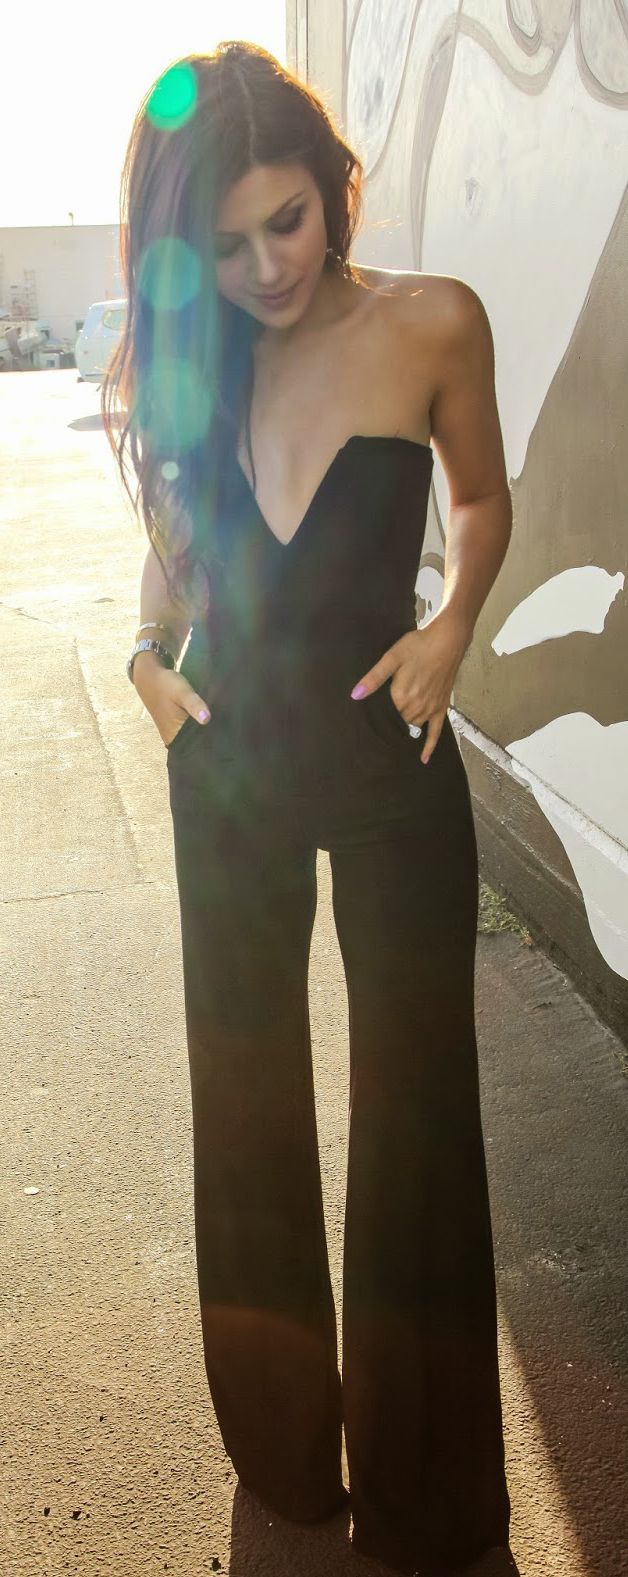 Jumpsuit.. Need to find this. Soo cute !! @Melissa Swackhammer we need to keep our eyes peeled for this!!